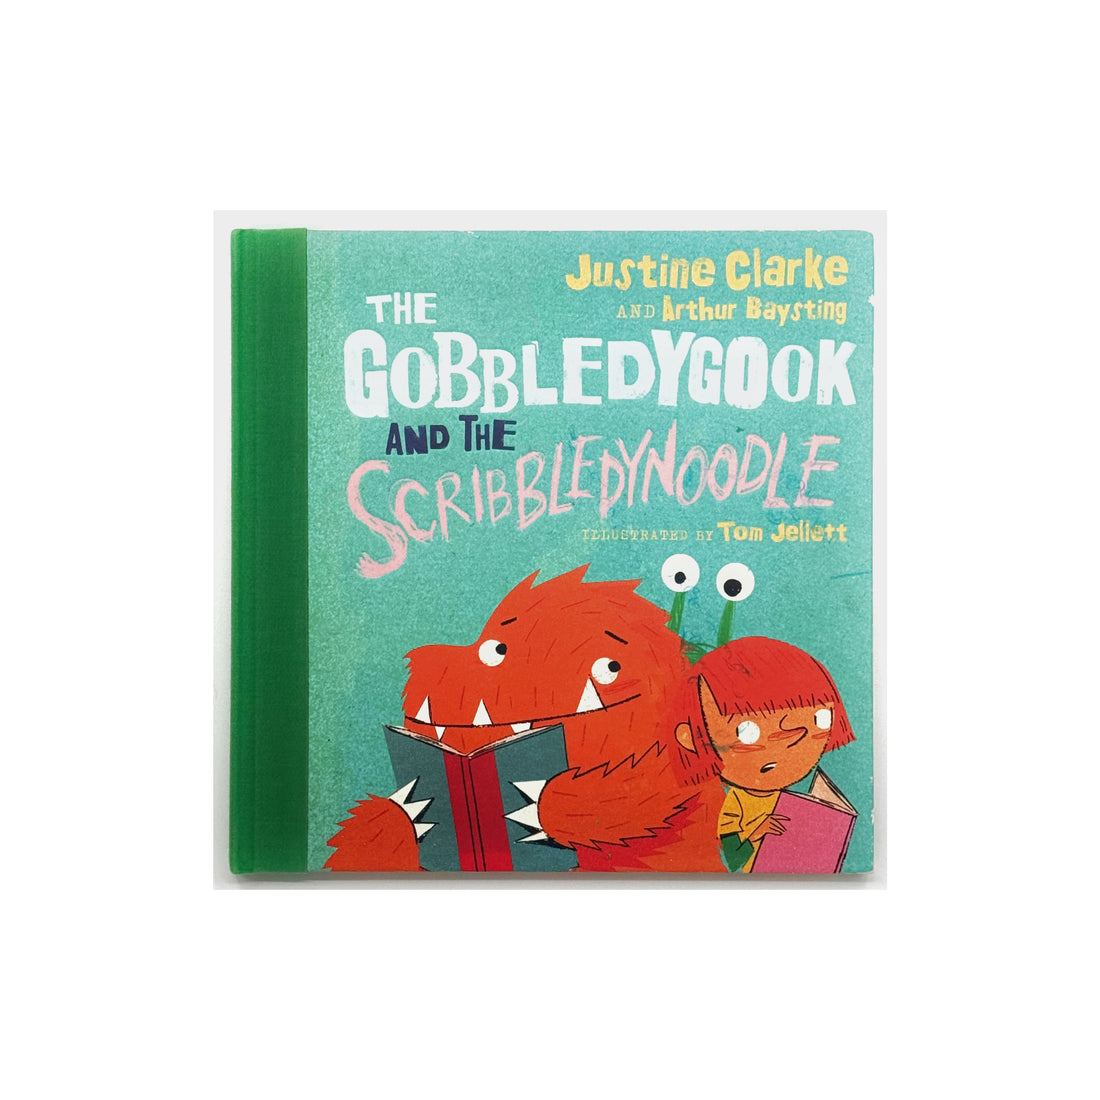 The Gobbledygook and the Scribbledynoodle by Justine Clarke and Arthur Basting